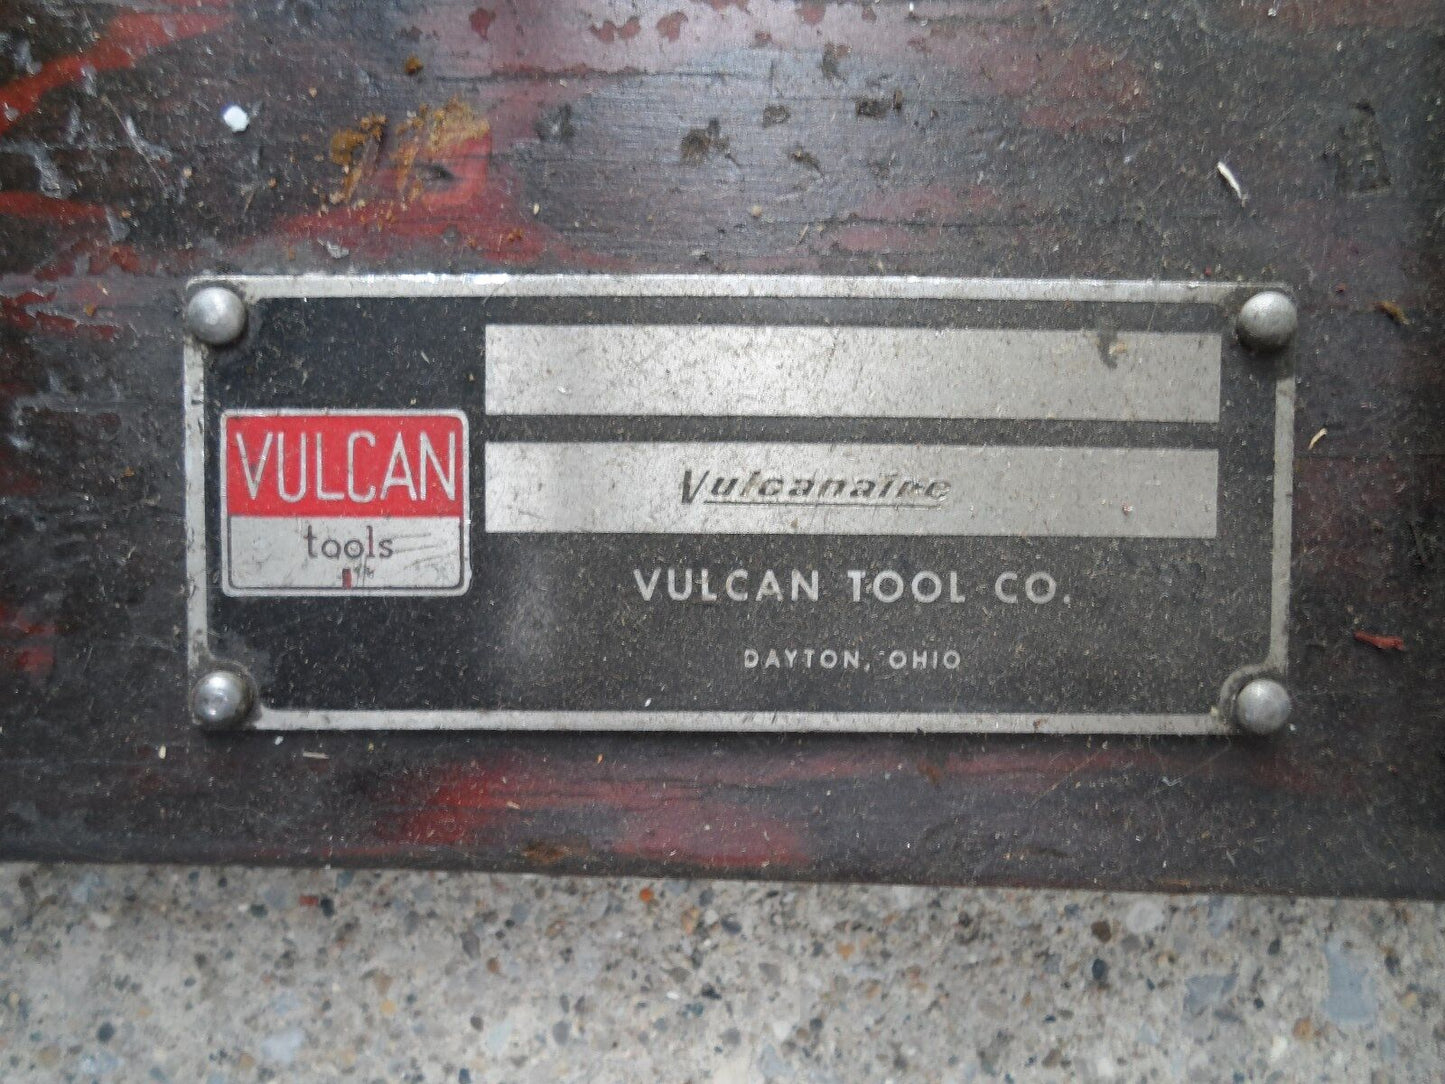 VULCAN TOOL JIG GRINDING System Vulcanaire Converts Machine Tool into